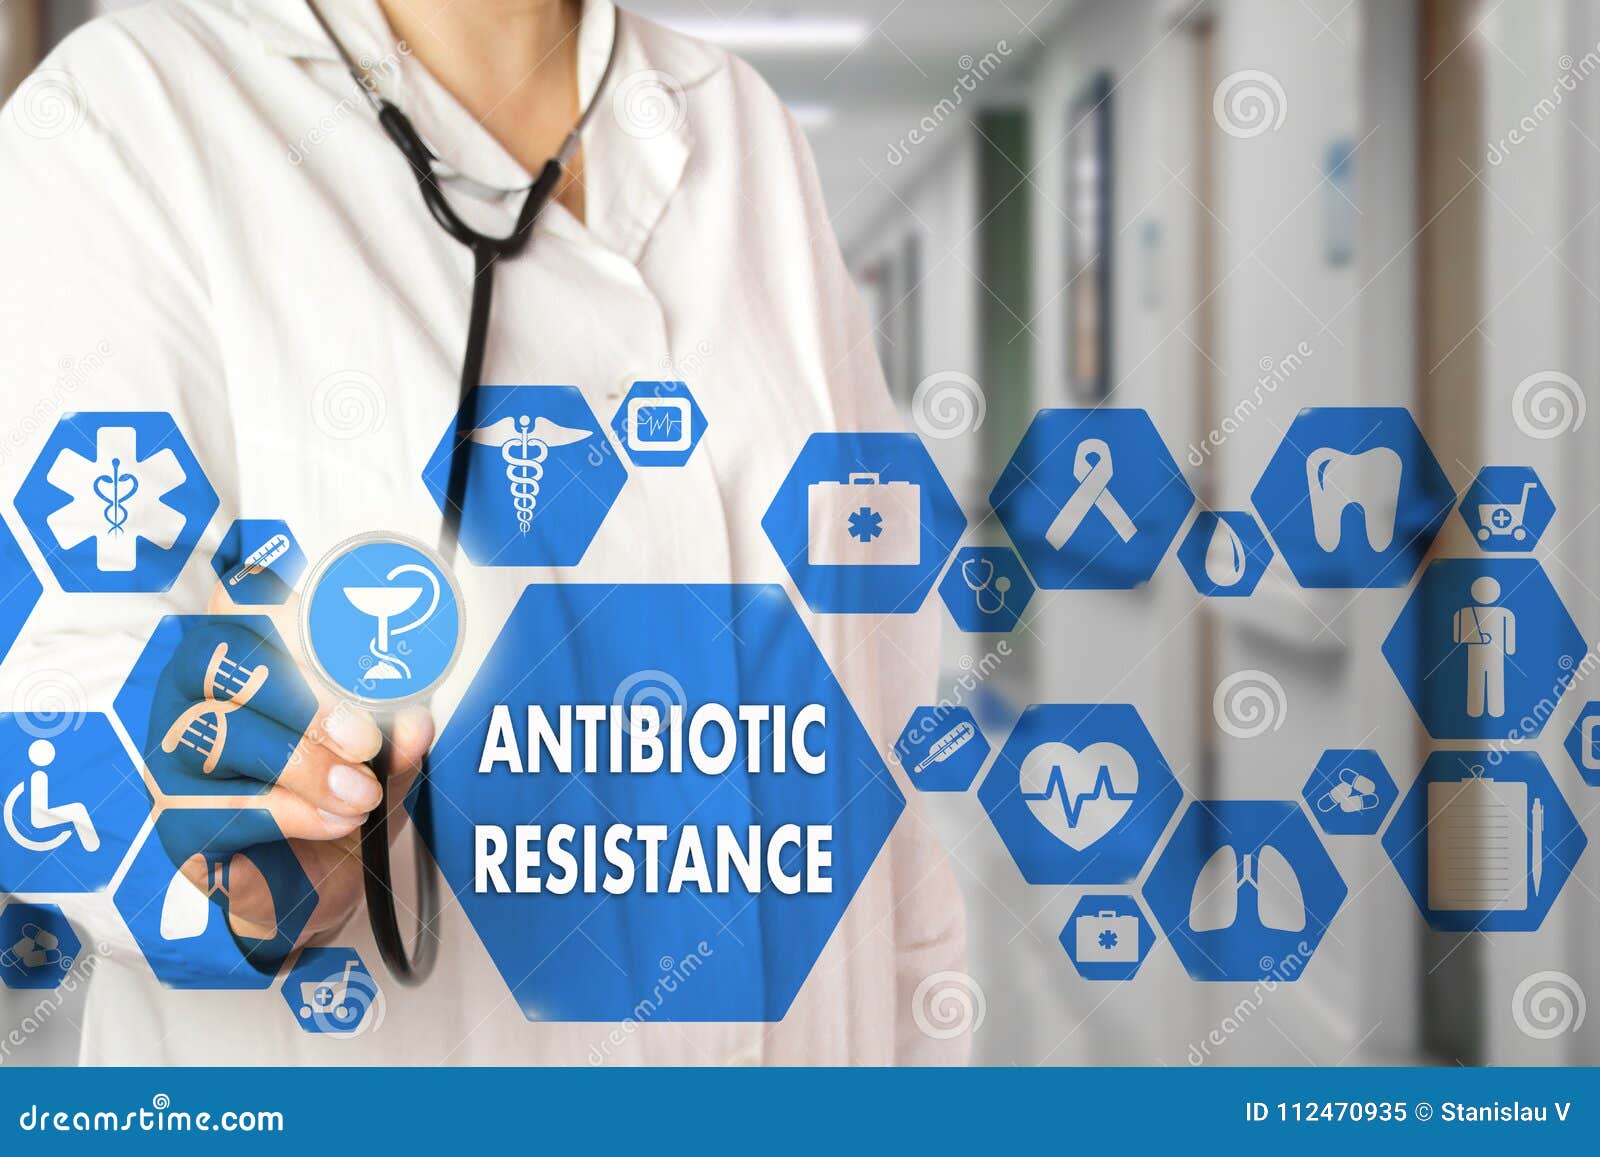 medical doctor and antibiotic resistance words in medical netwo